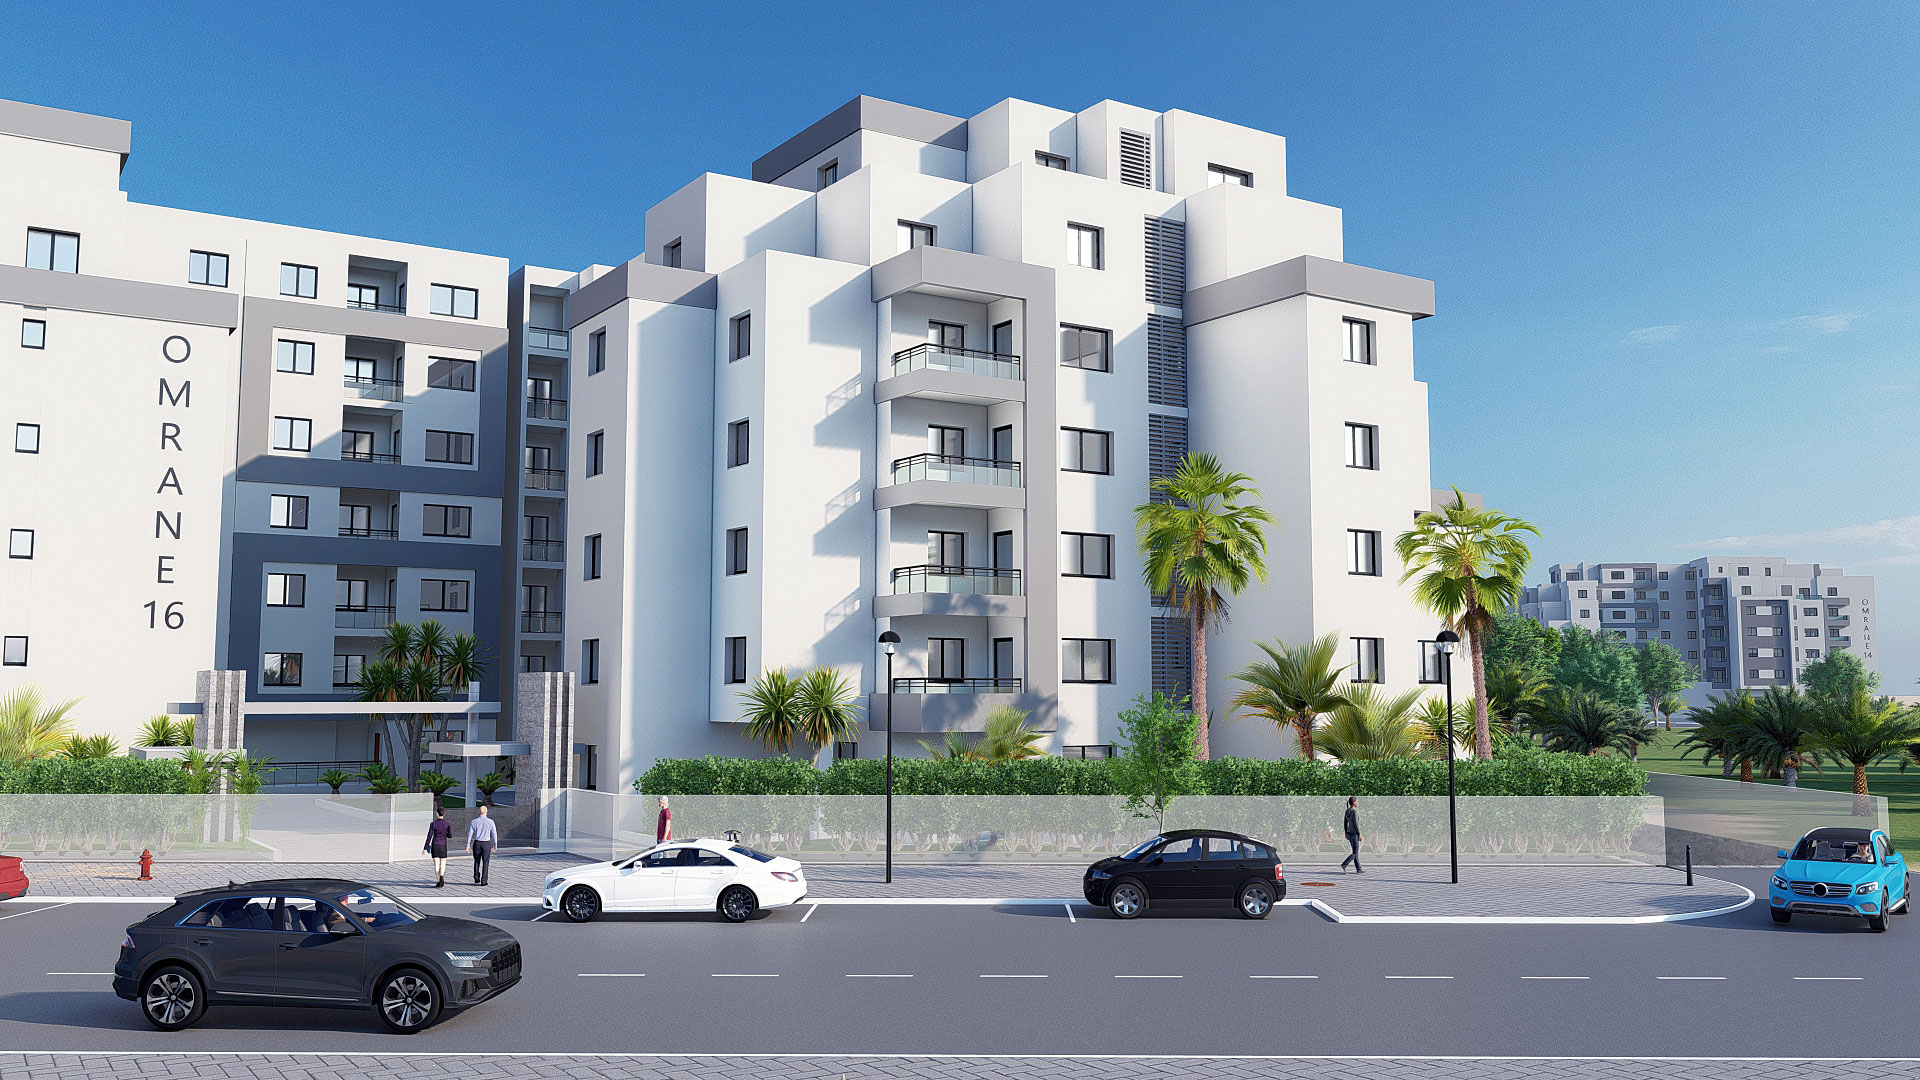 residence-omrane-16-immobiliere-du-maghreb-cite-el-ghazela-immobilier-appartement-tunisie-1-4